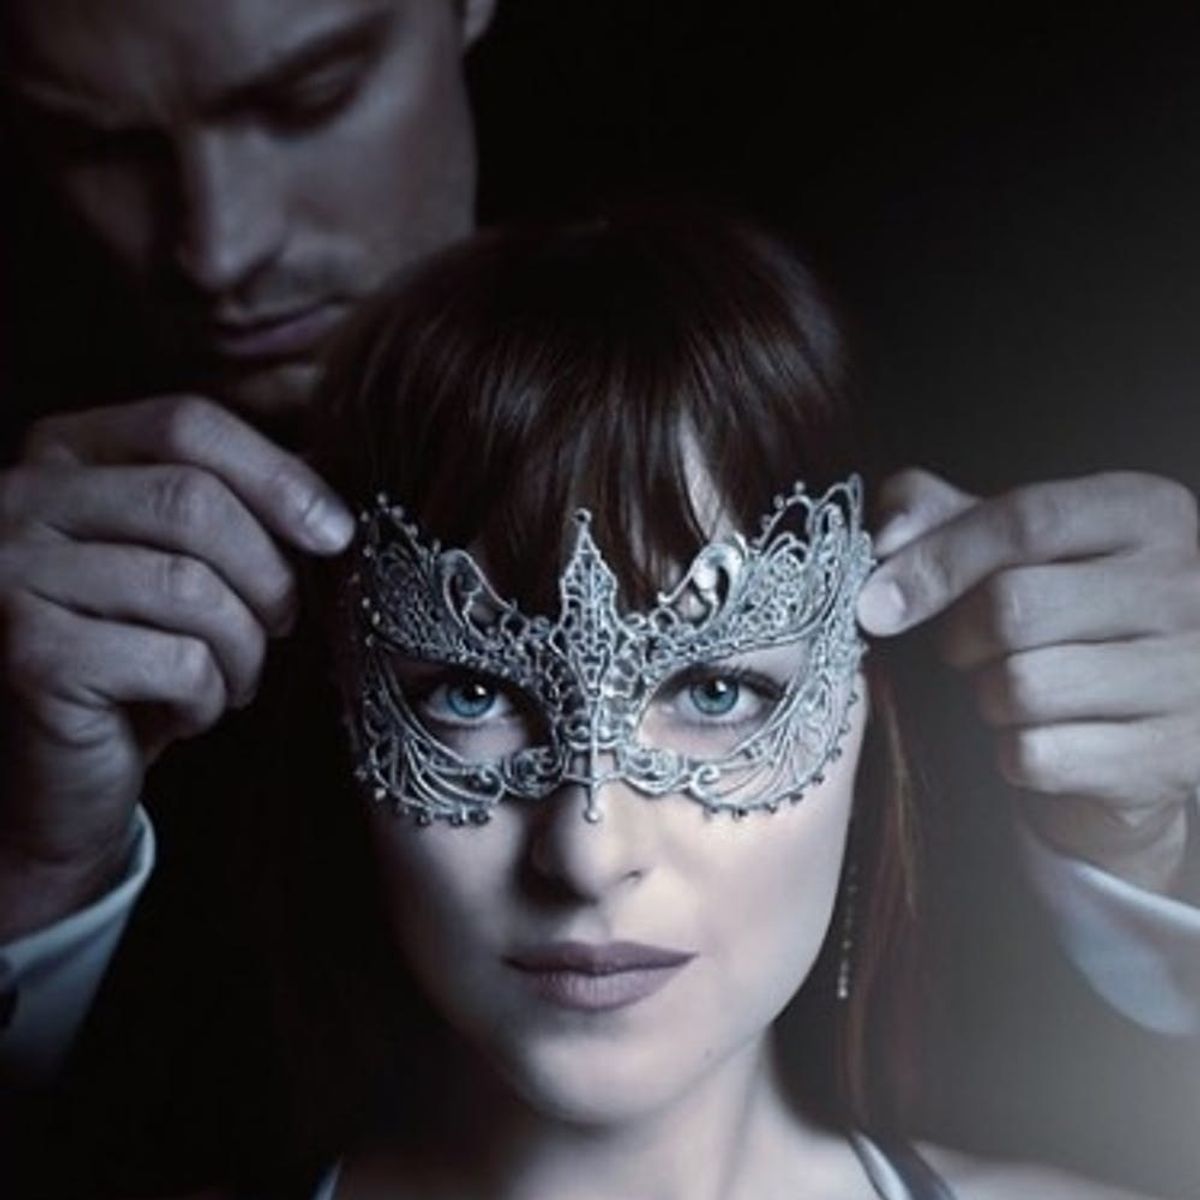 The New “Fifty Shades Darker” Trailer Teases a Sexy Masquerade